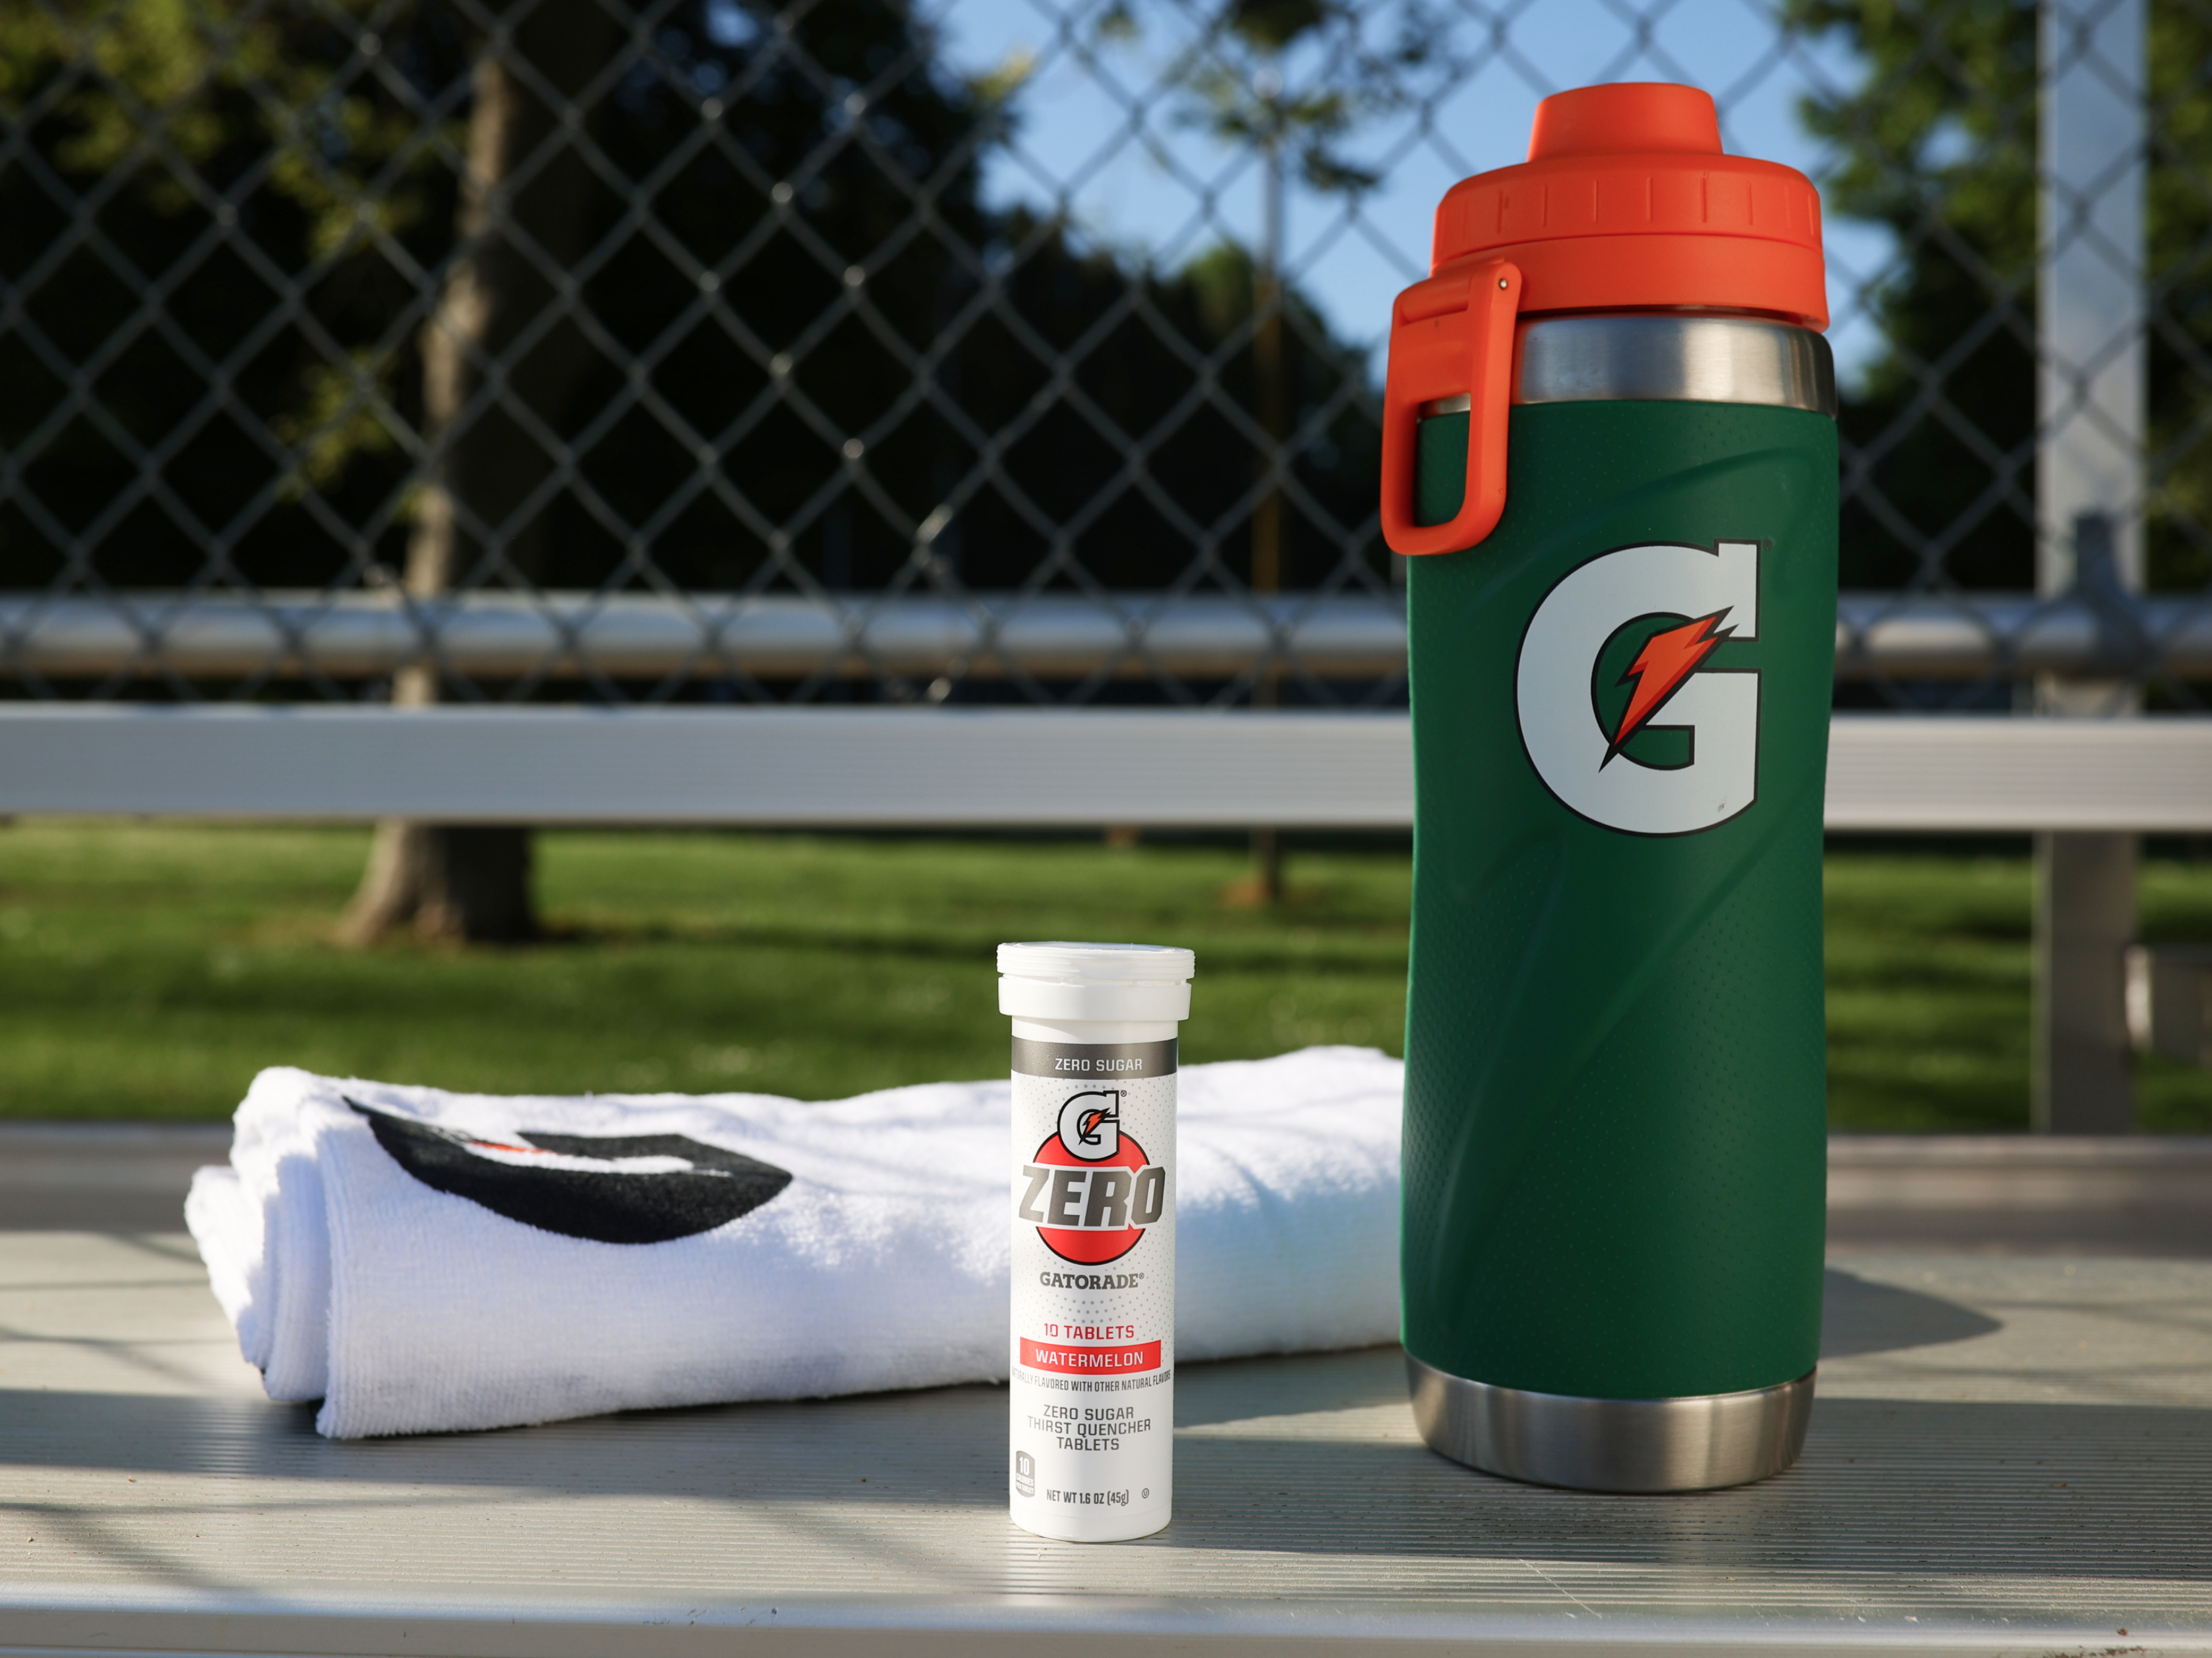 Gatorade zero watermelon tablets with Gx towel and stainless steel bottle